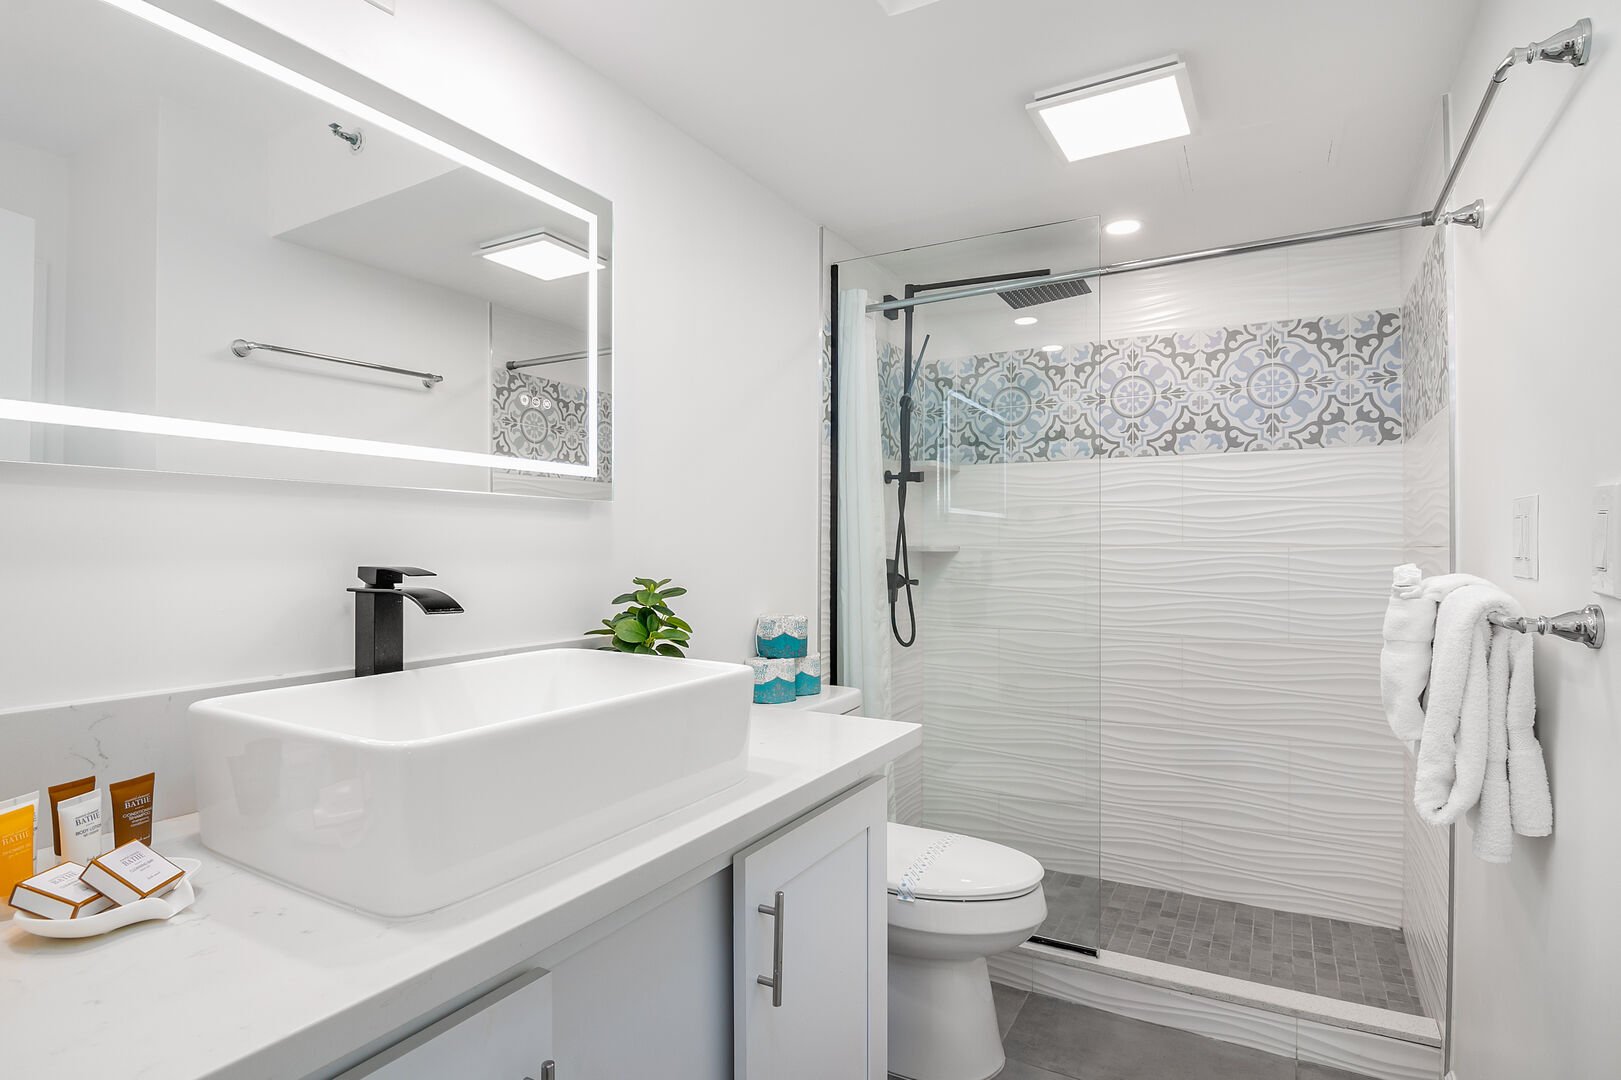 Full bathroom with walk-in shower, and a vanity with cabinet.